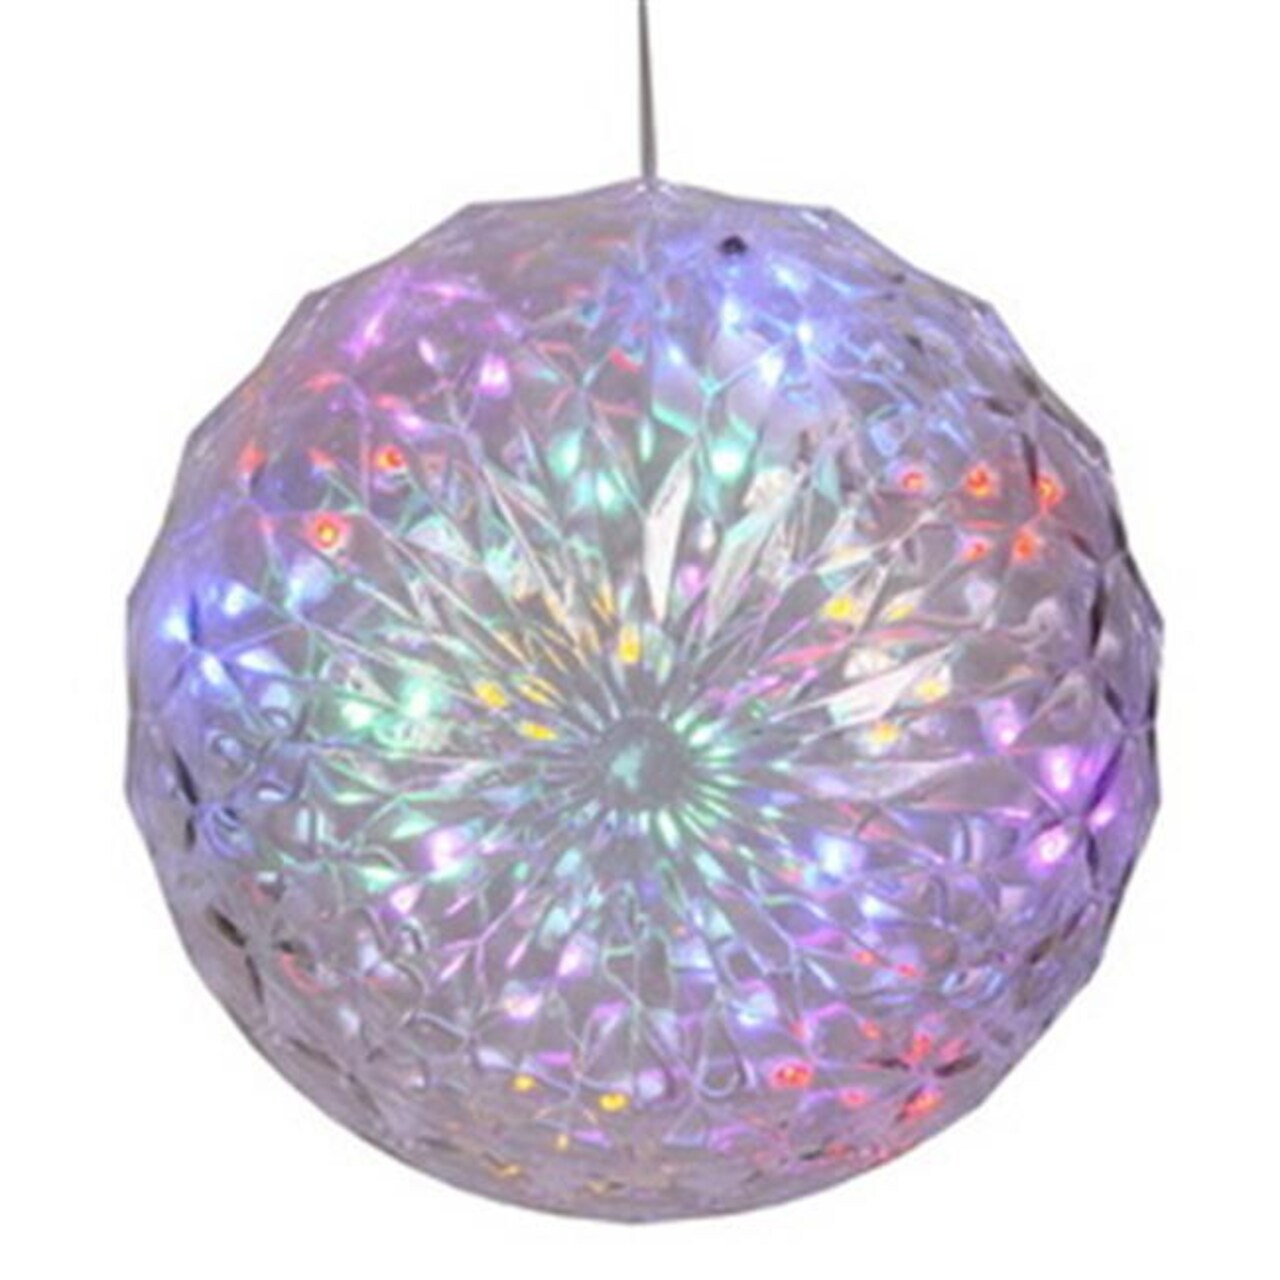 30Lt X 6 in. LED Multi Crystal Ball Outdoor